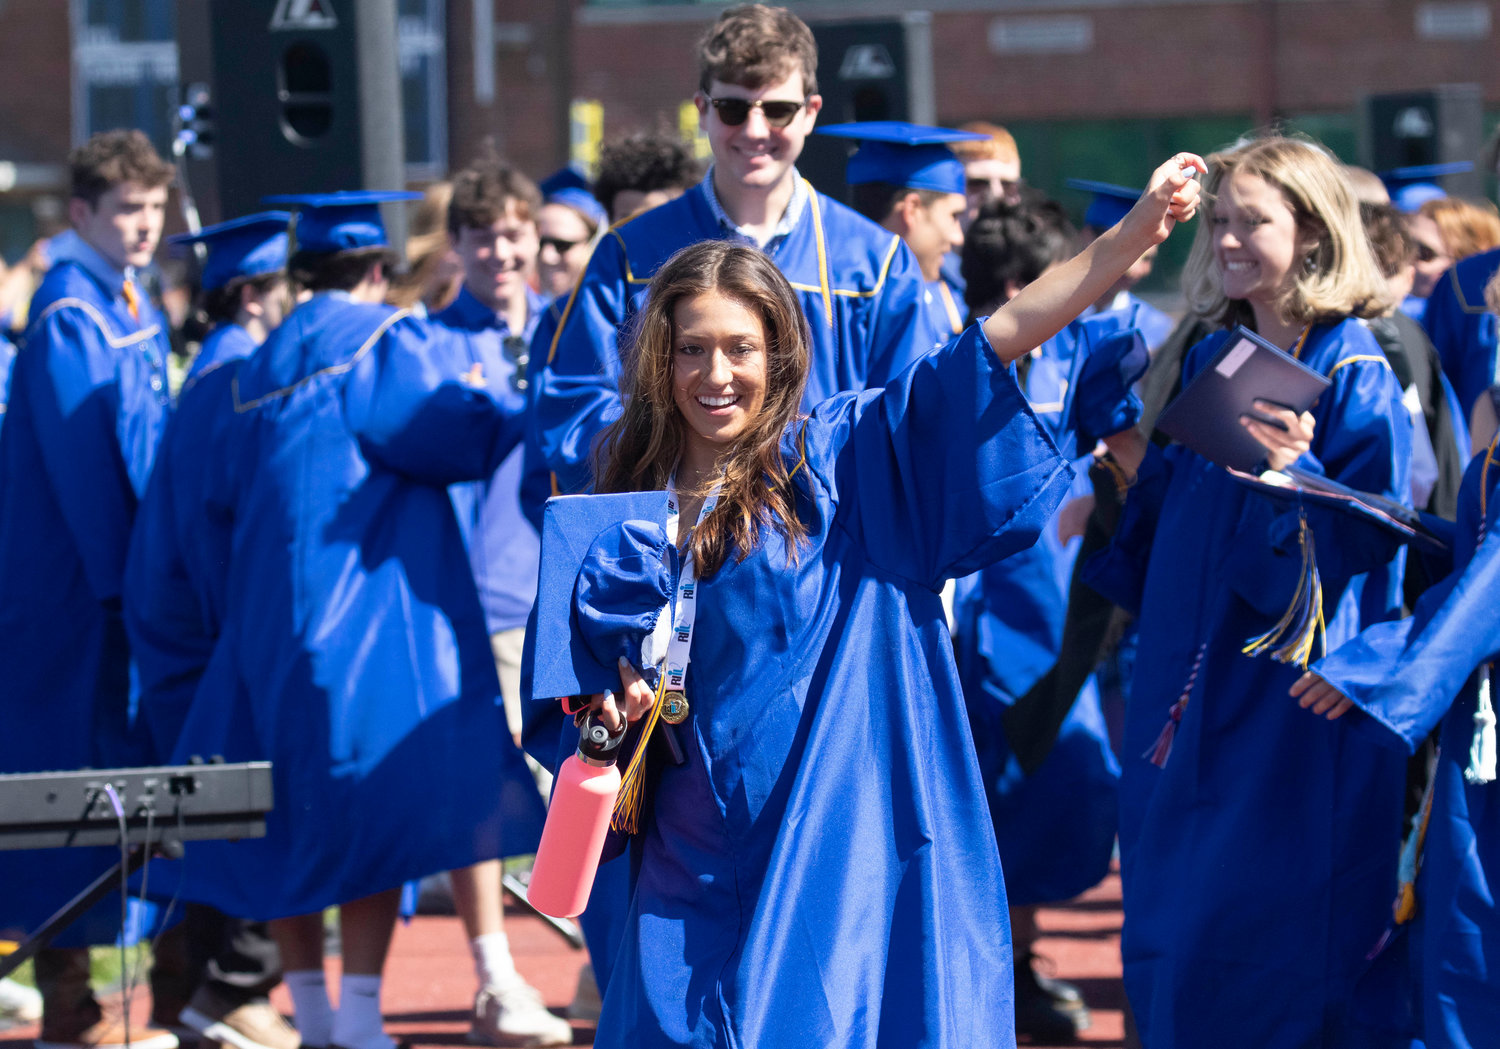 A final wave following the graduation ceremony on Sunday.